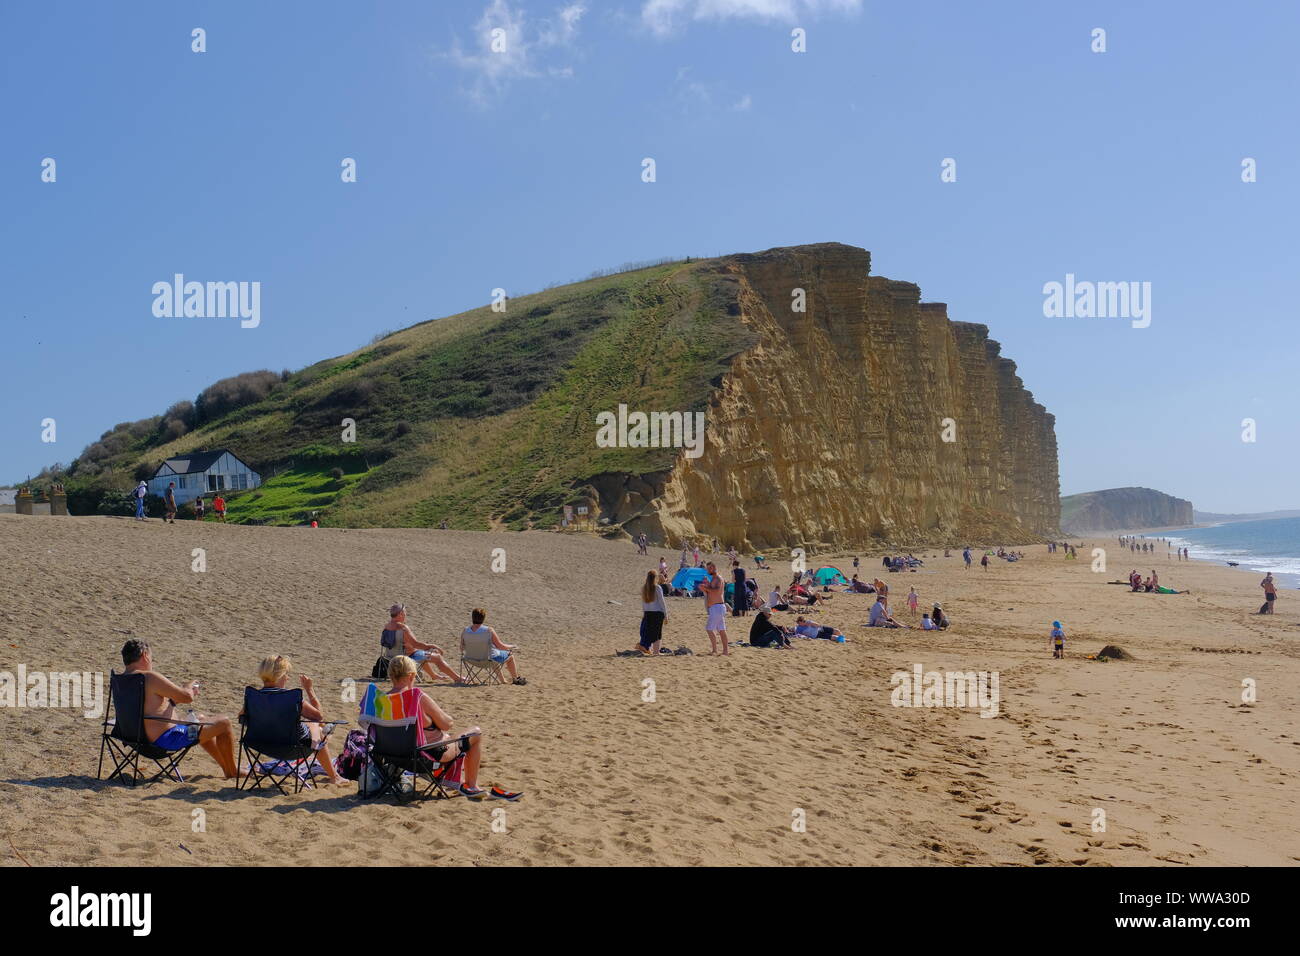 West Bay, Dorset, UK. 14th Sep, 2019. Locals and visitors alike enjoy the sunshine at West Bay on the Dorset coast as the UK basks in an Indian Summer. Credit: Tom Corban/Alamy Live News Stock Photo